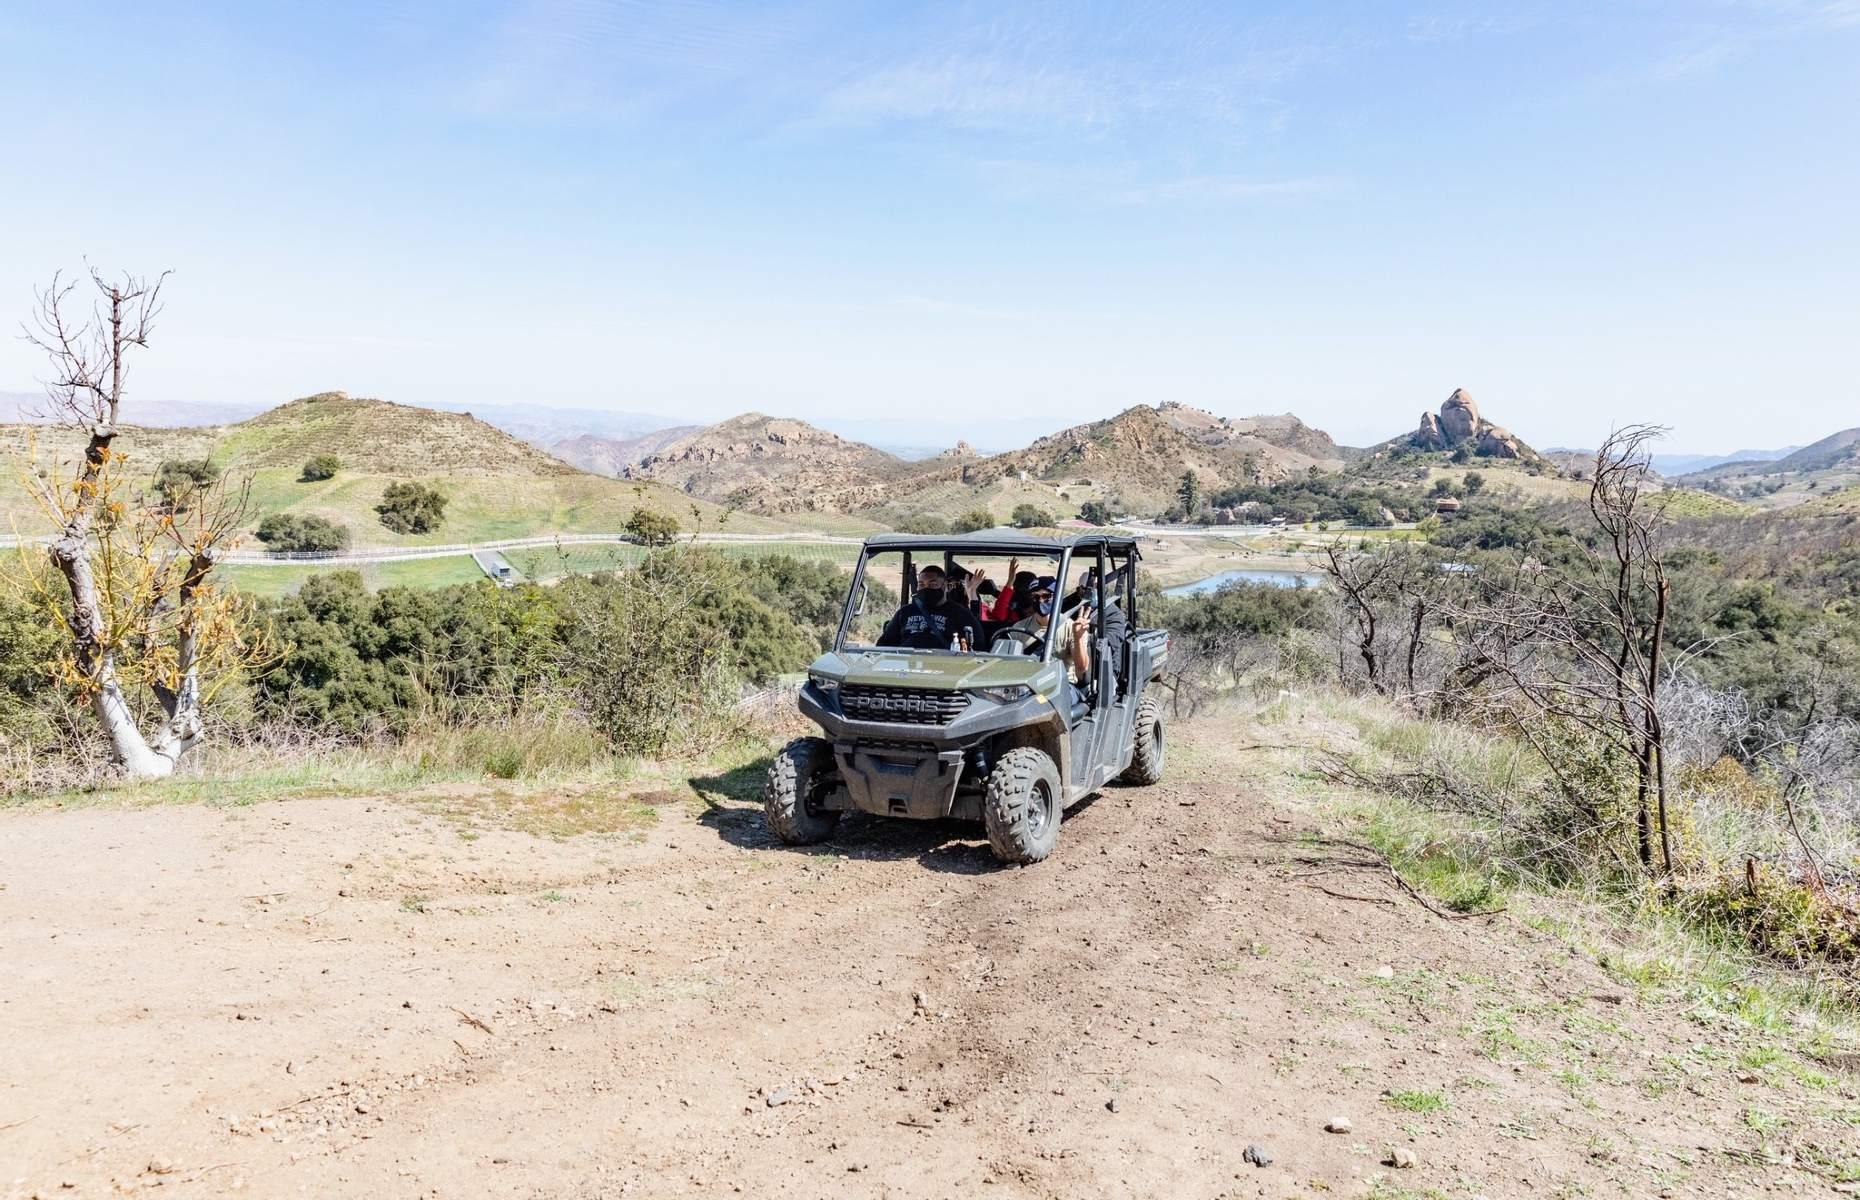 <p>If you like your wine with a side of adventure, check out <a href="https://www.malibuwinehikes.com/">Malibu Wine Hikes</a>’ 4x4 tours, which allow you to explore California’s stunning Malibu Wine Country in style. That’s right: you get to board a 4x4 off-road vehicle, journeying through the 1,100-acre Saddlerock Ranch and stopping along the way to sample locally-grown blends. Or if you’d like something a little less off-road, try their VW Wine Bus Tour, where you’ll be guided around in a gloriously nostalgic vintage VW bus, stopping at locations in Saddlerock Ranch as well as Malibu Canyon.</p>